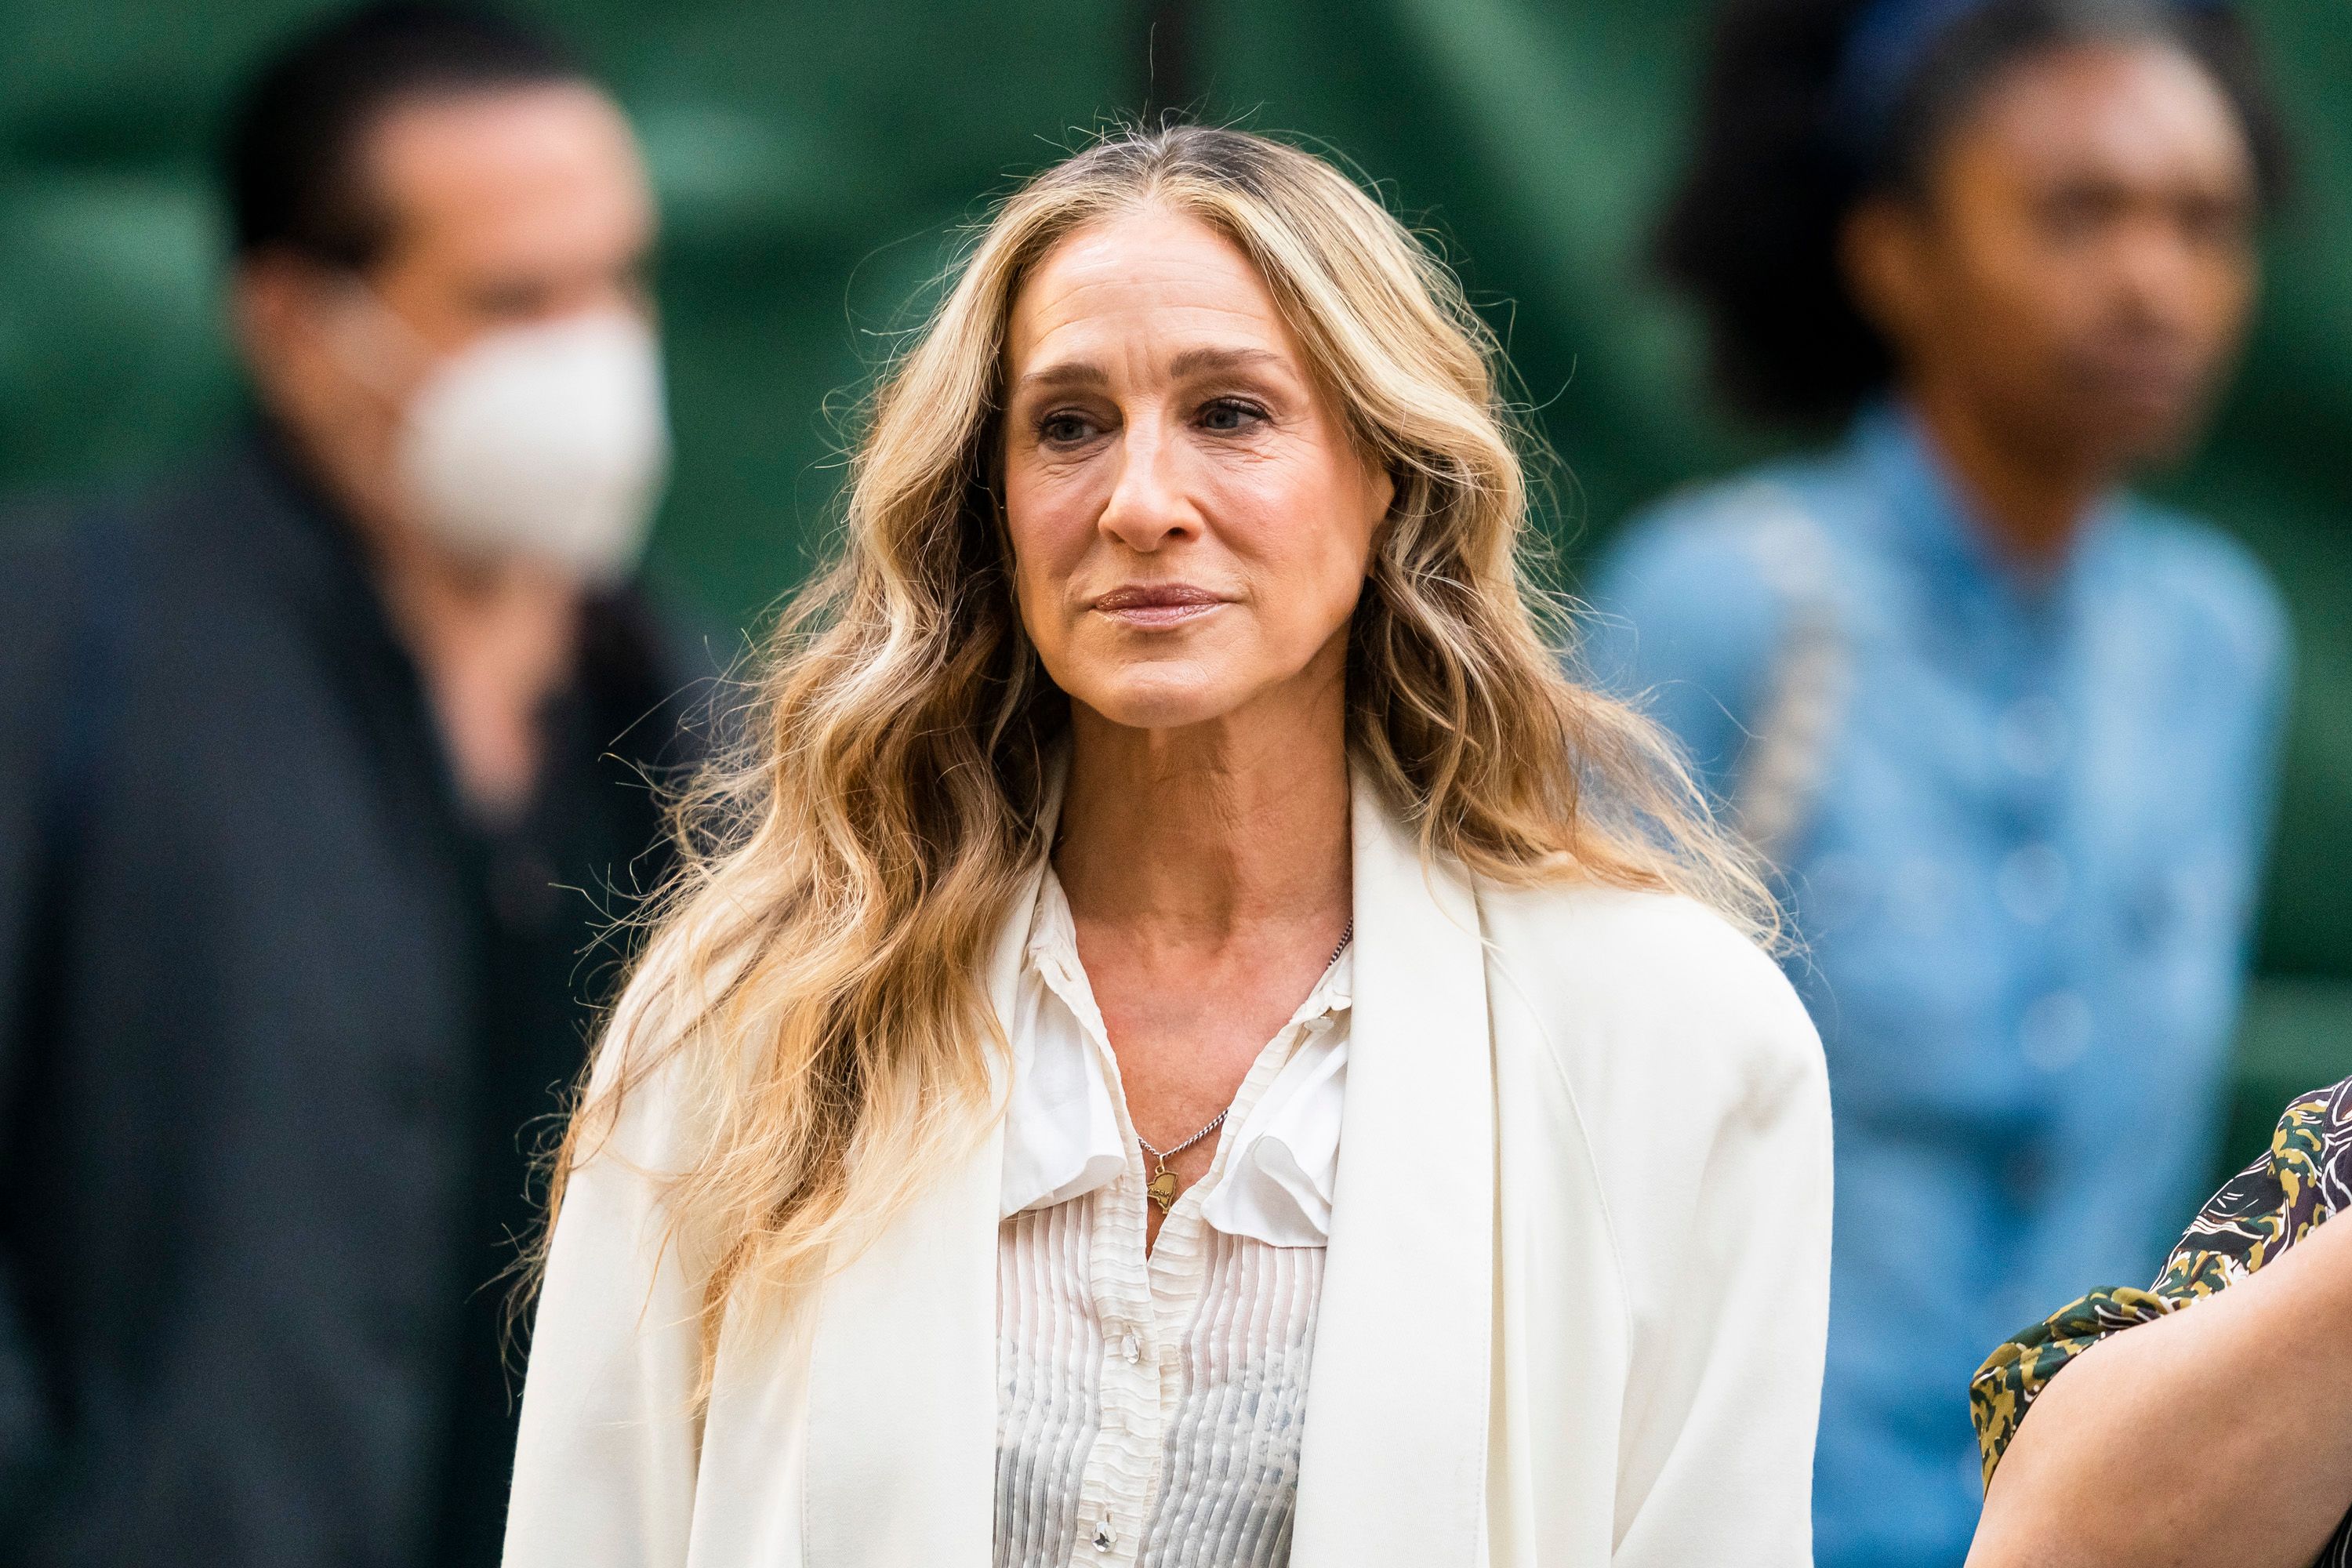 Sarah Jessica Parker Fucking - Sarah Jessica Parker is not here for your 'misogynist' ageism | CNN